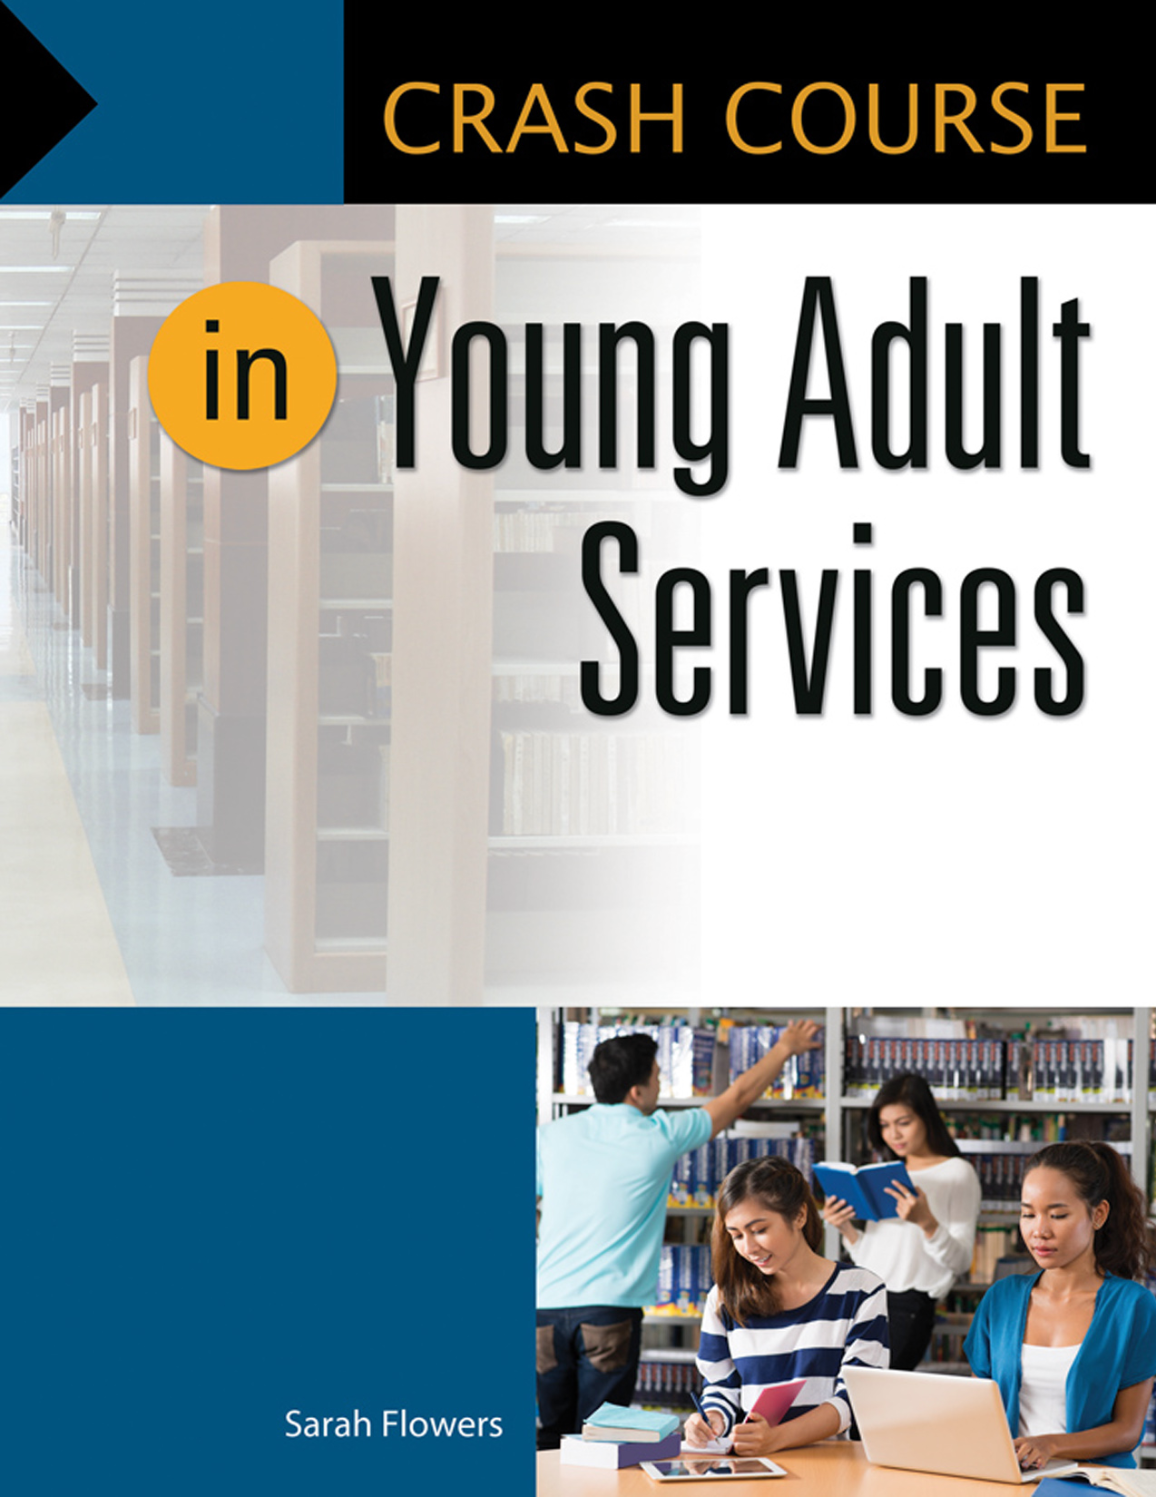 Crash Course in Young Adult Services page Cover1